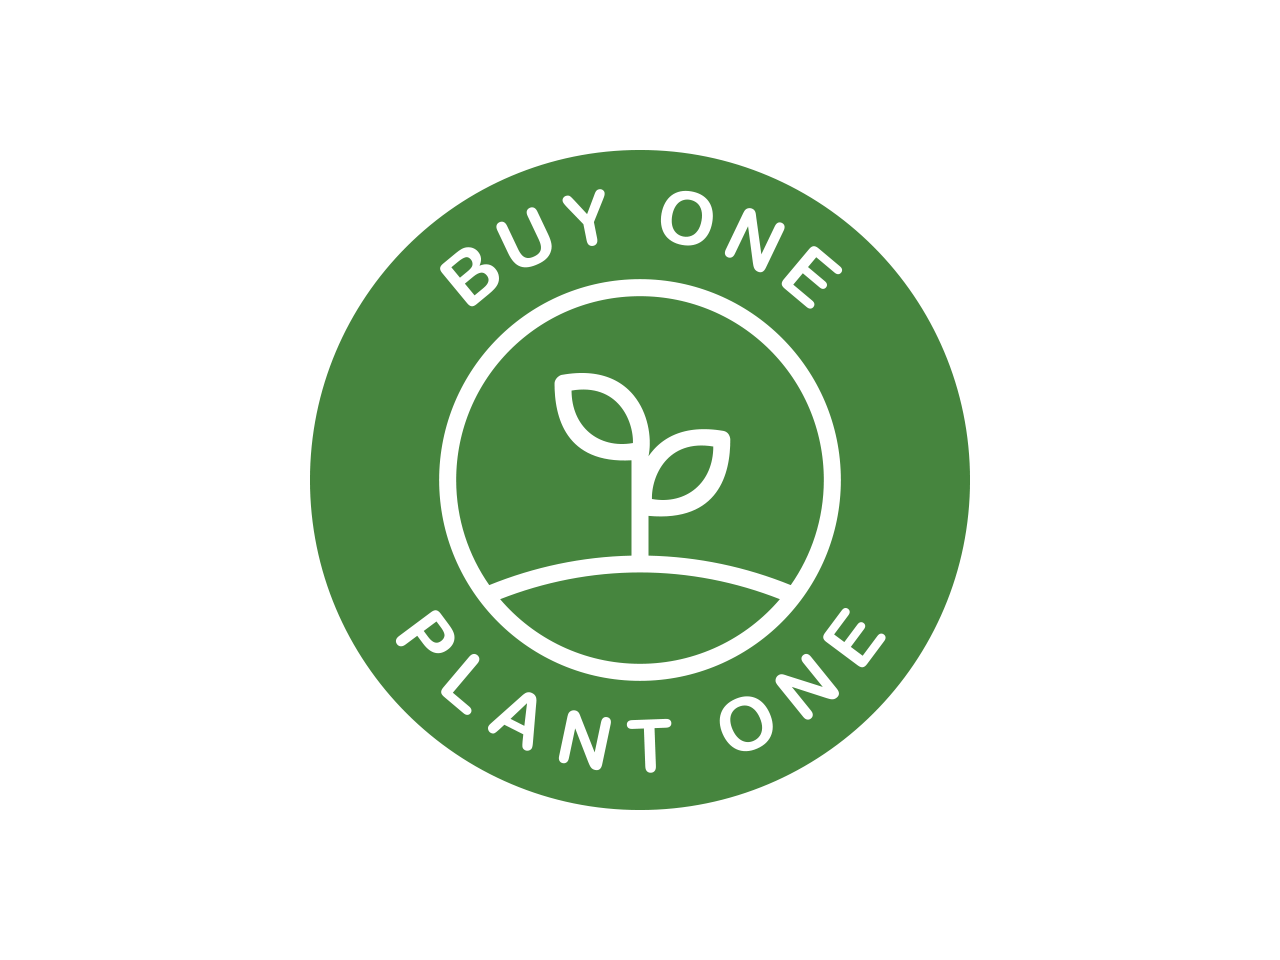 Buy One. Plant One.